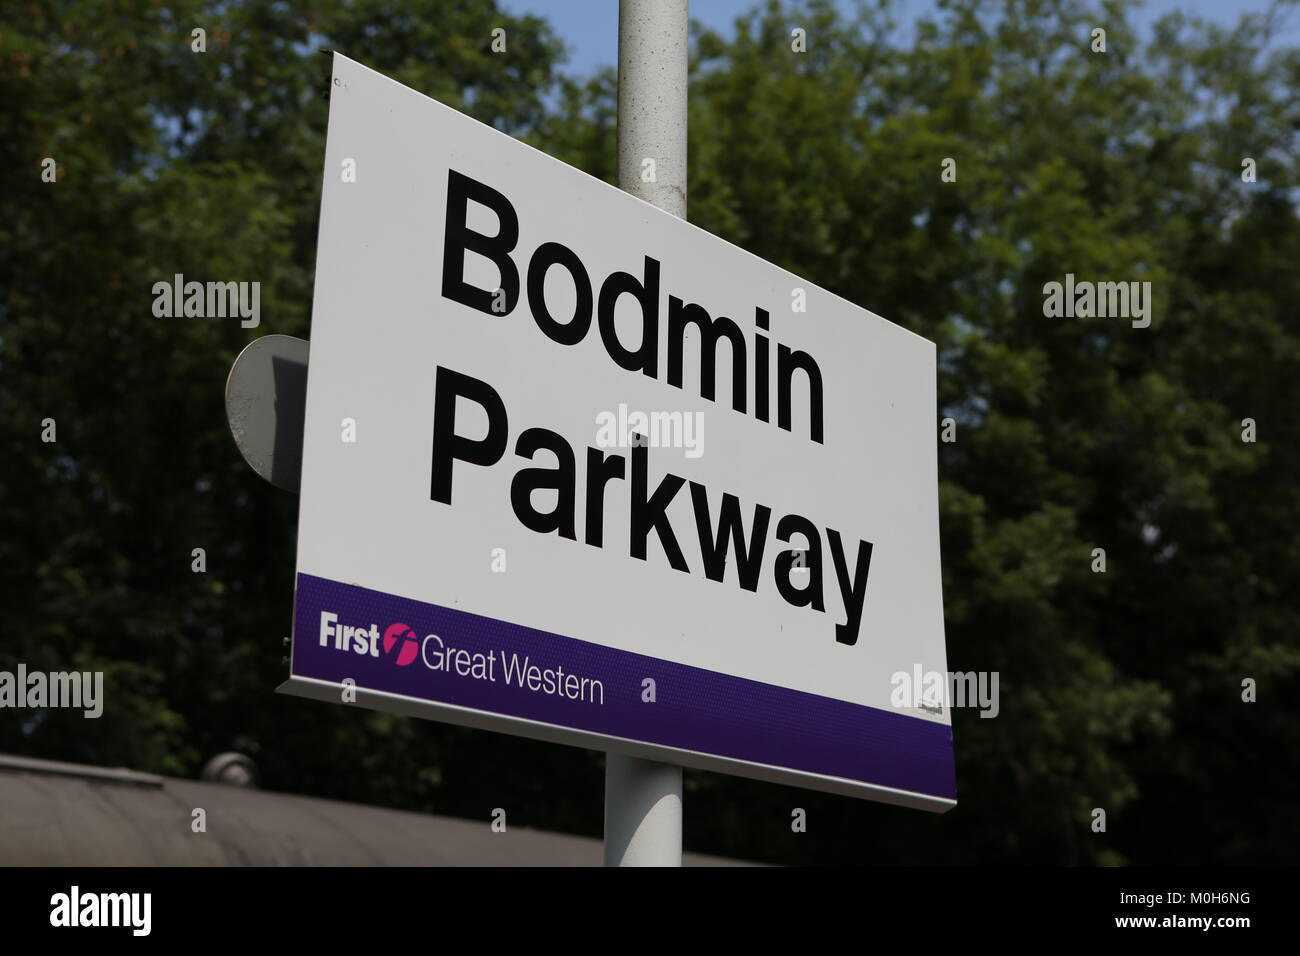 bodmin parkway railway station and signal box Stock Photo